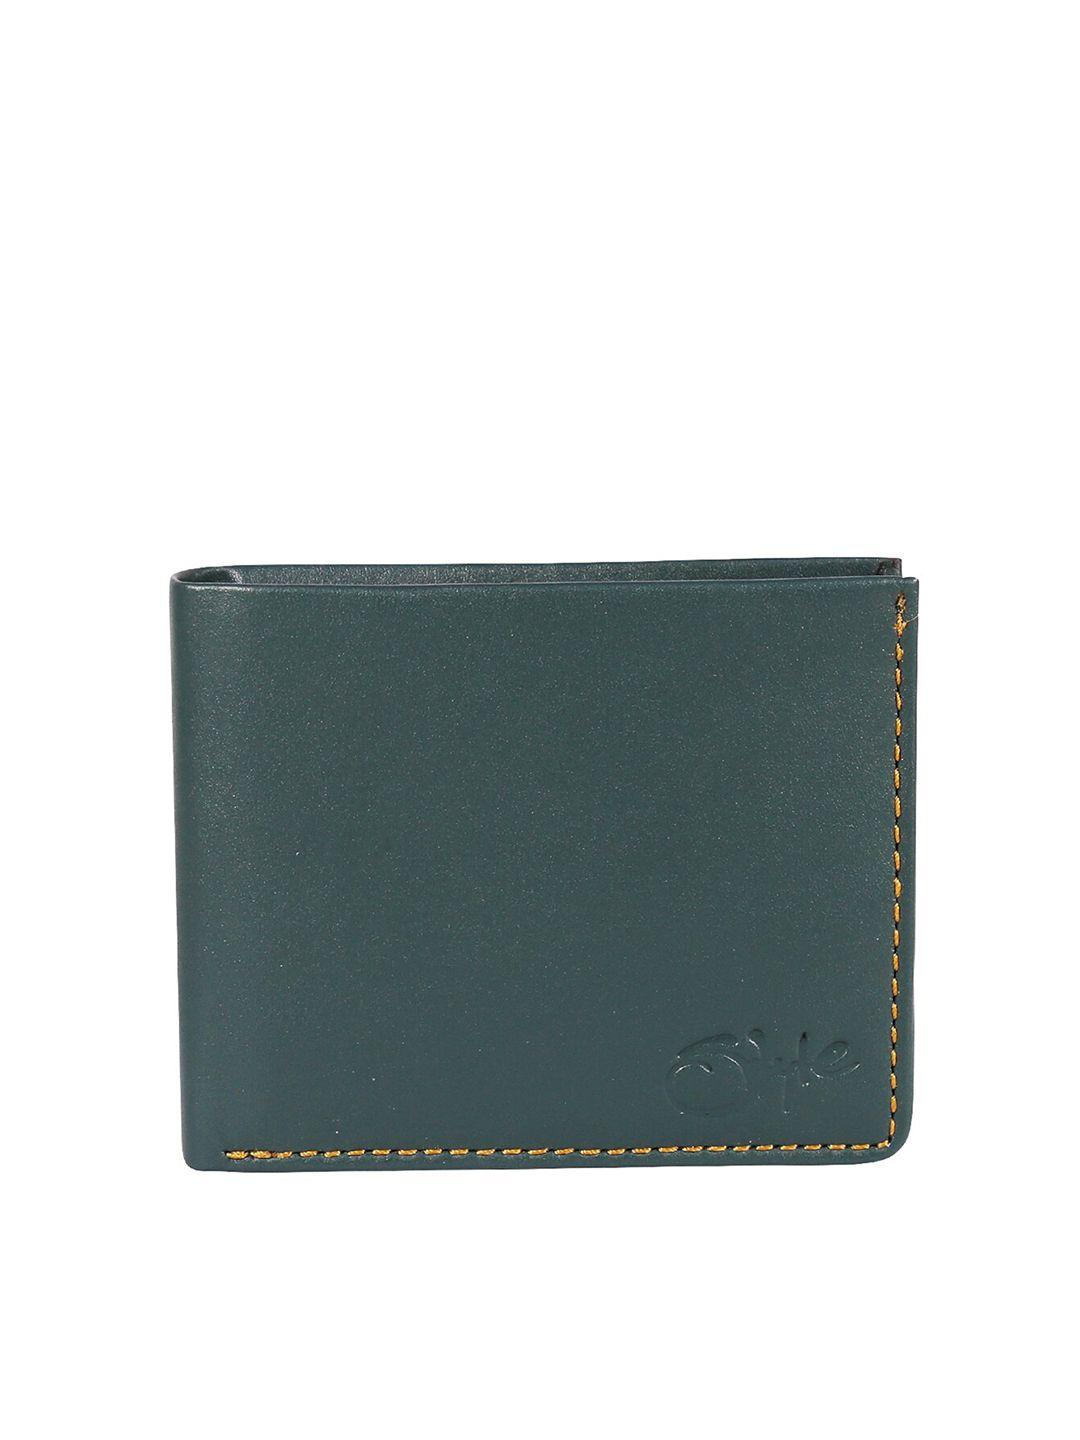 style shoes men green leather rfid two fold wallet